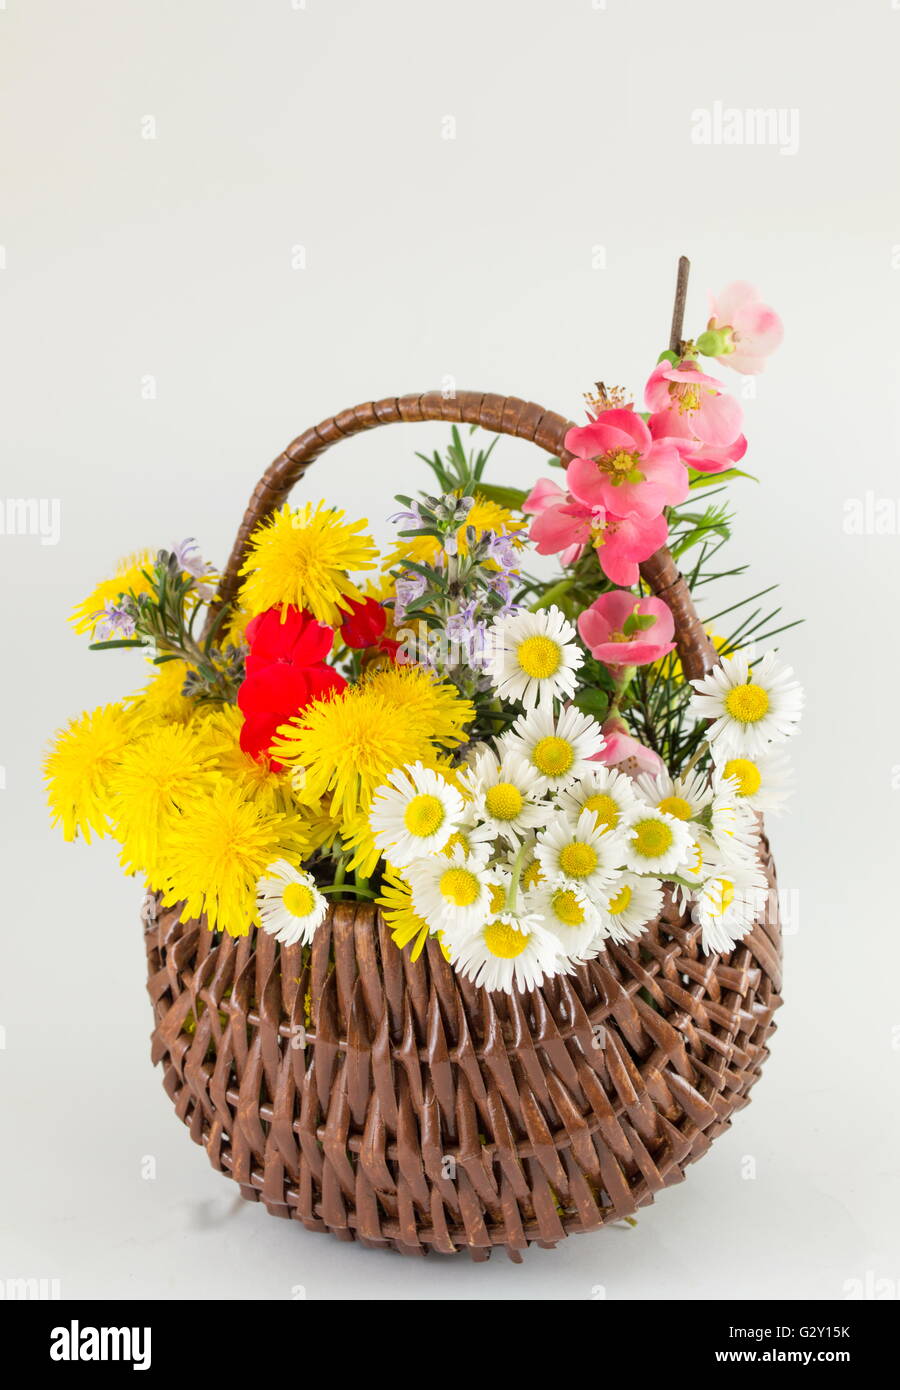 Flower basket made of wicker against white background Stock Photo